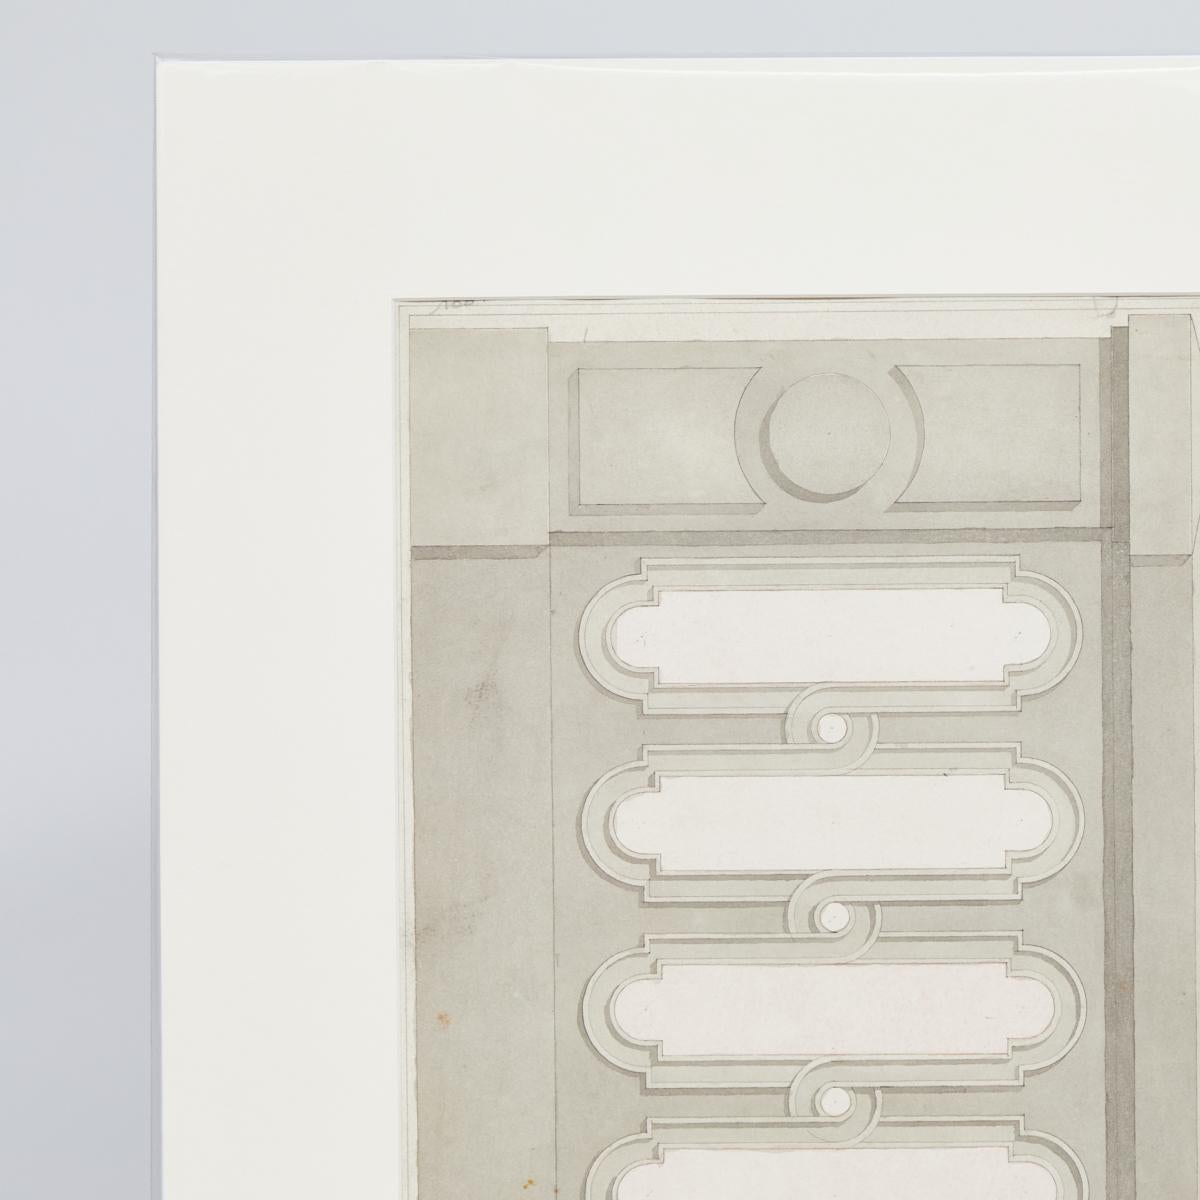 Early 20th-century French color lithograph. The image is an architectural study for the decorative program of a cabinet, door, or wall panel. With its muted color palette and exceptional attention to detail, the piece has a light and airy quality.